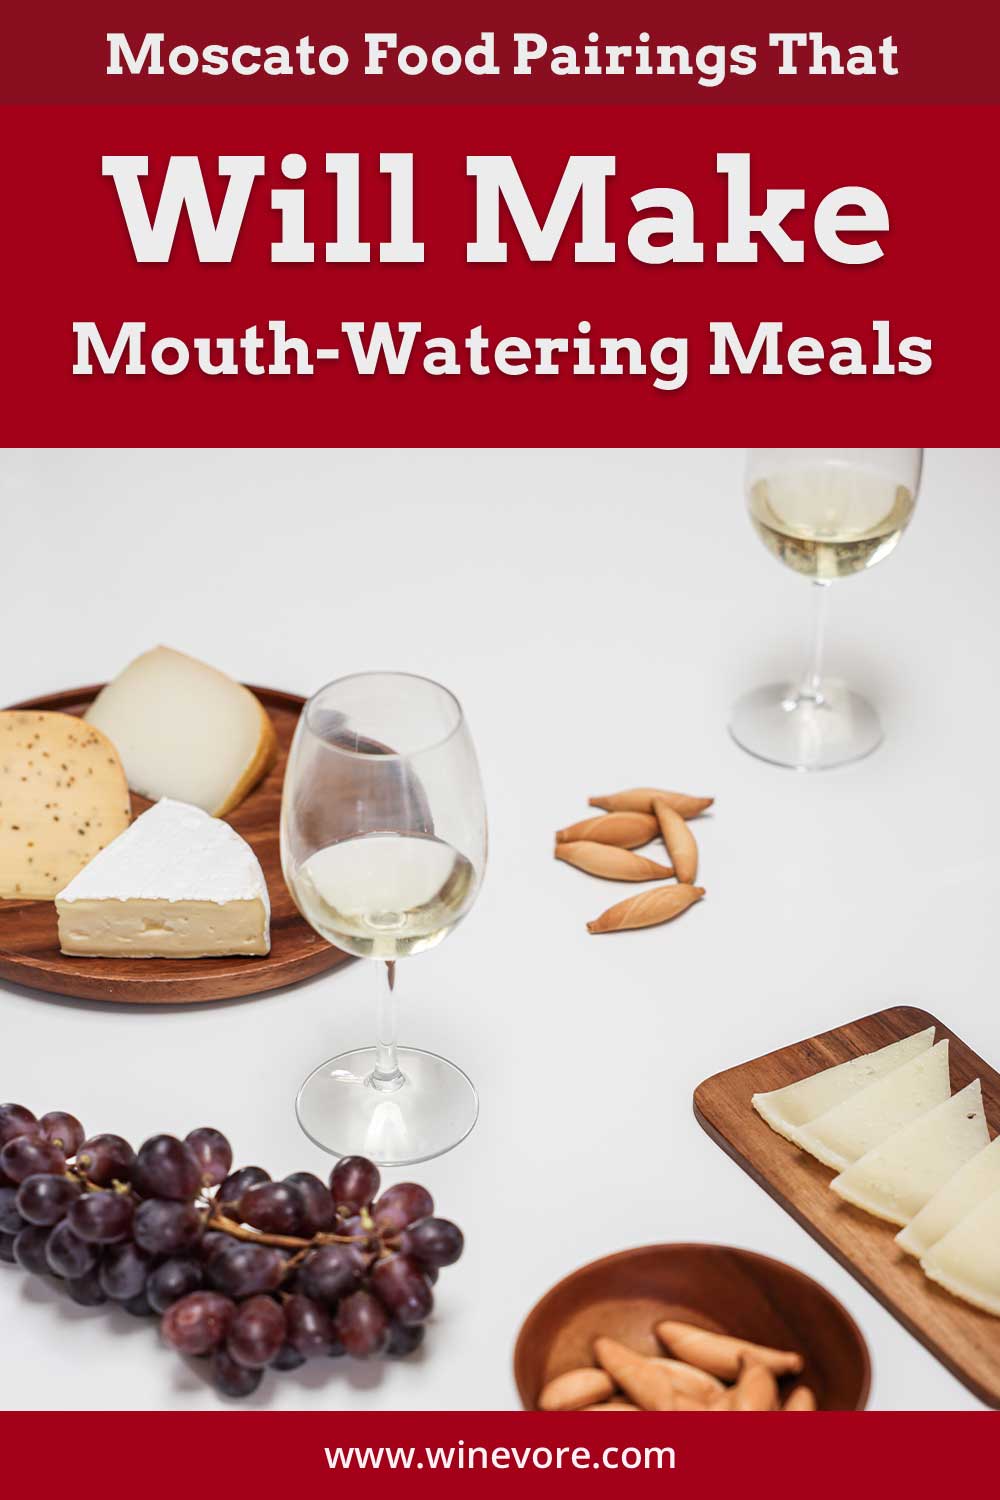 A wine glass with cheese and grapes on a white surface - Moscato Food Pairings.